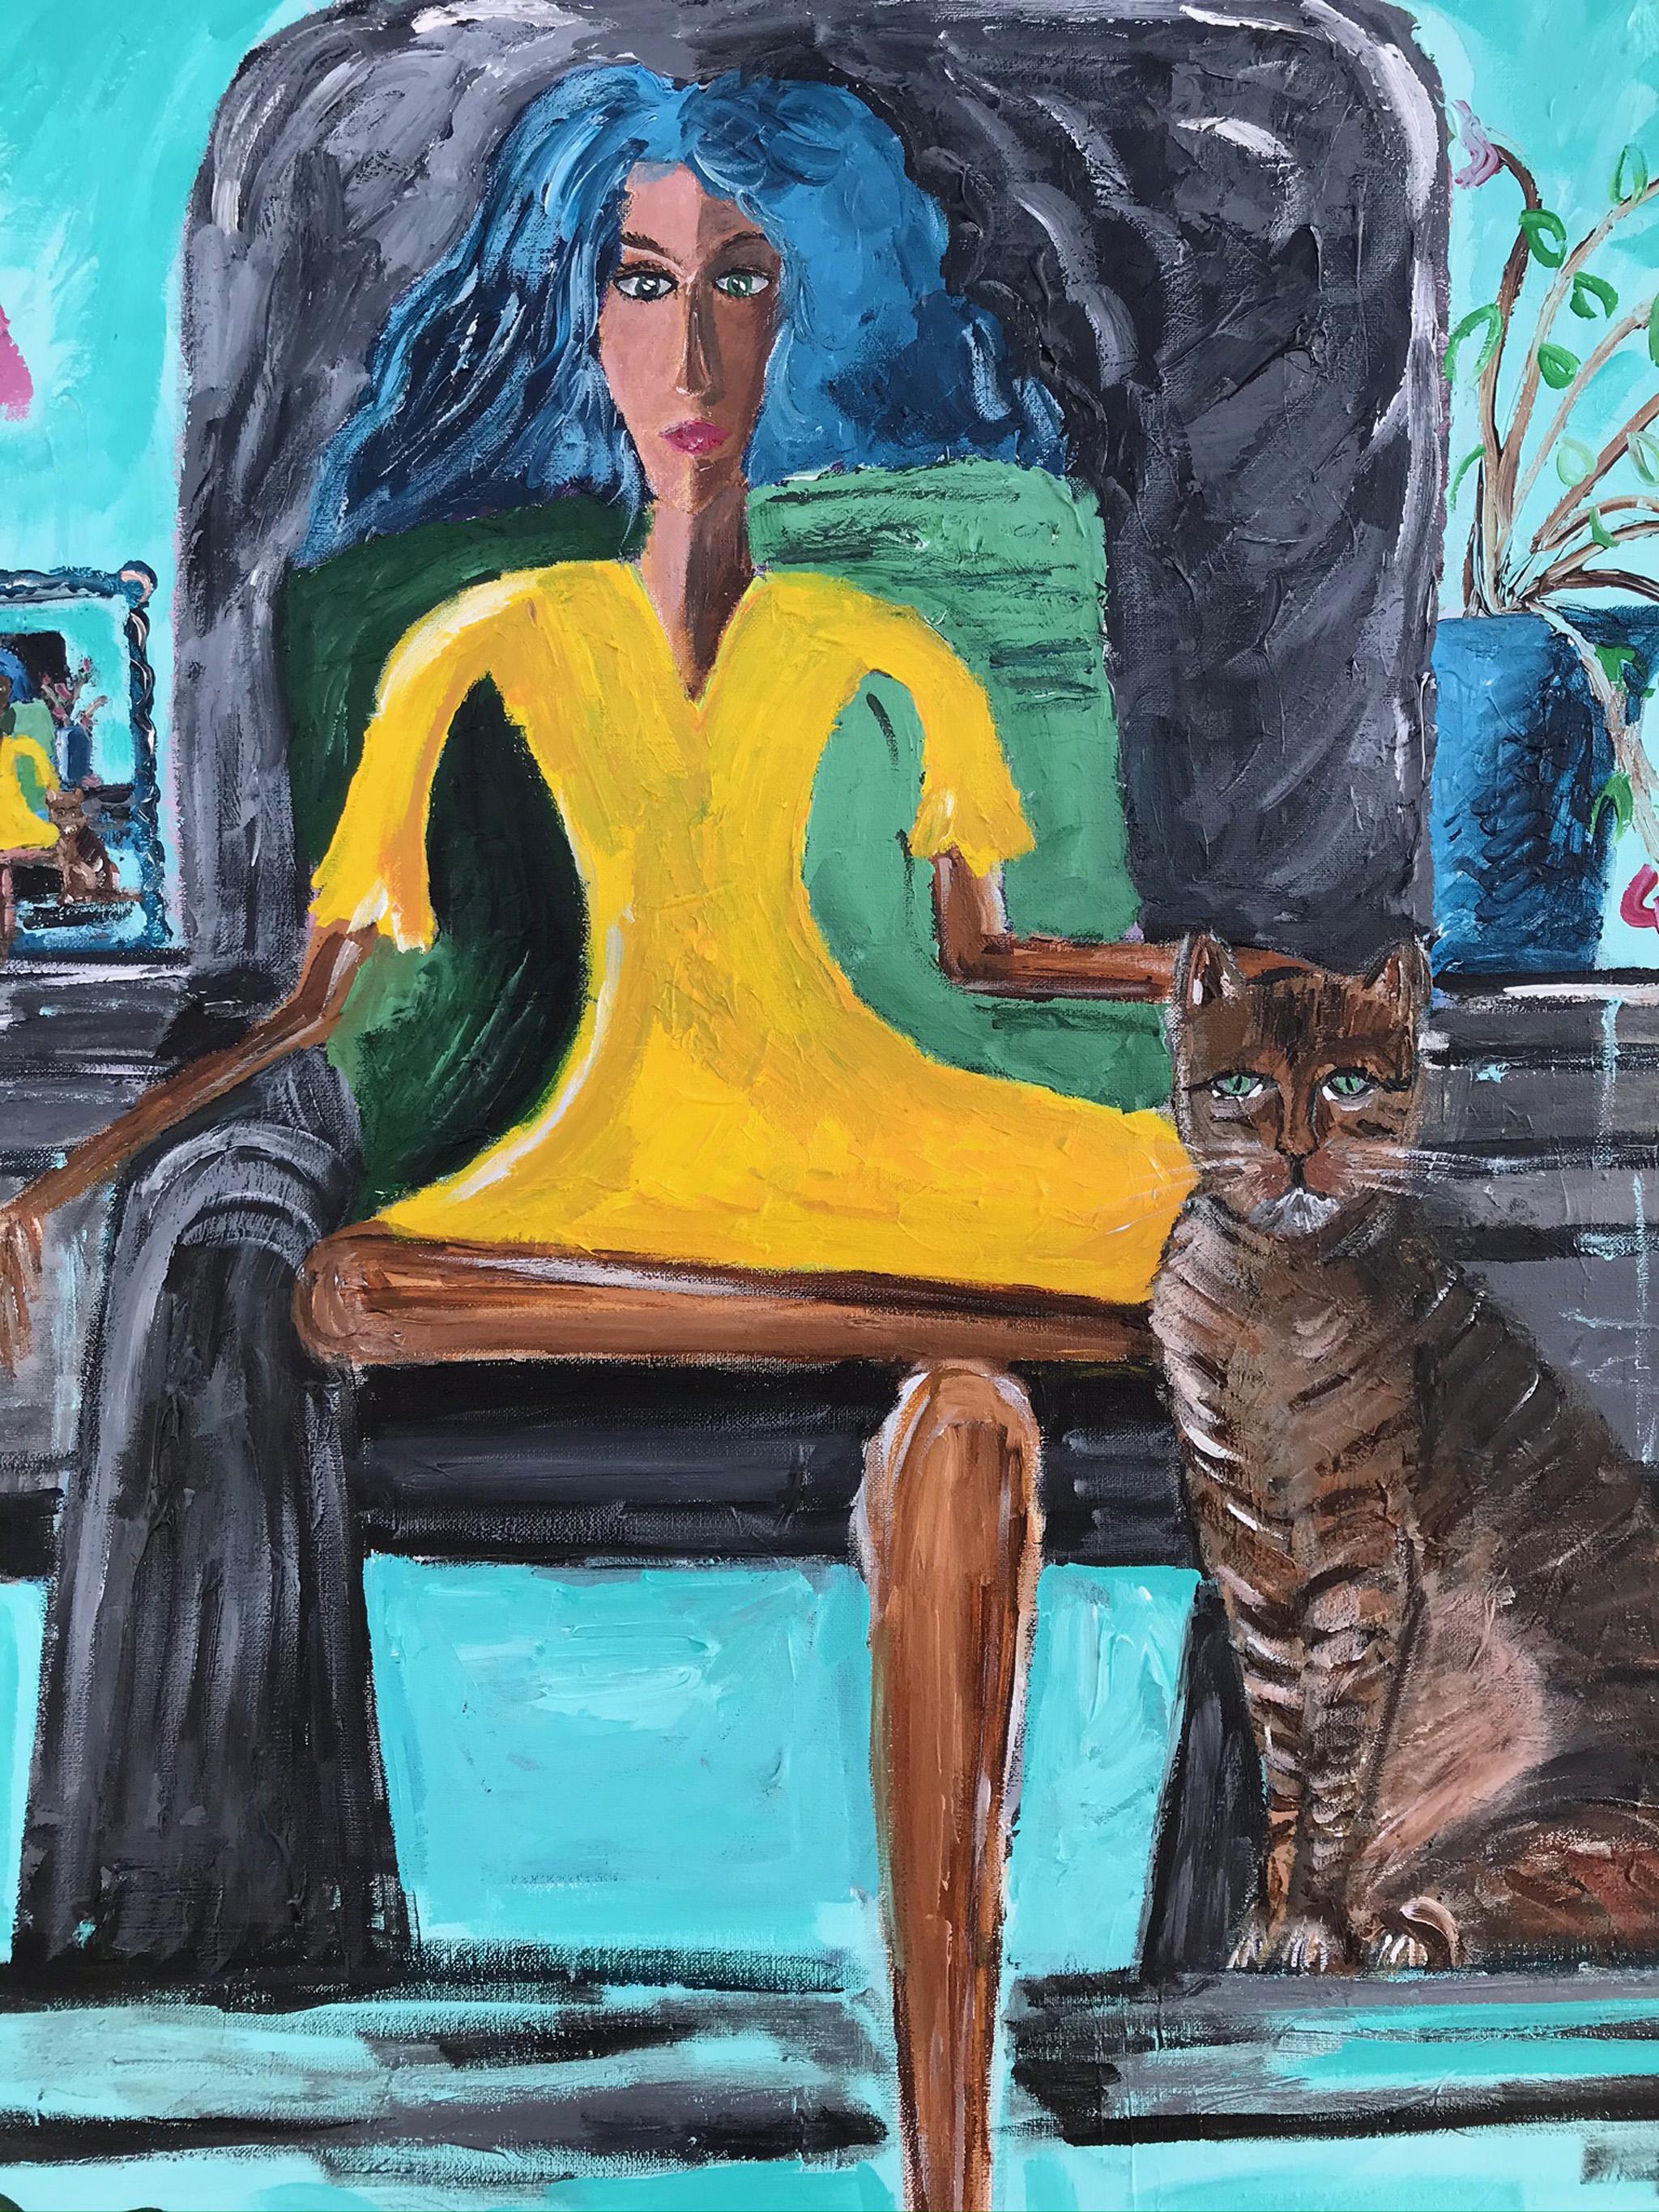 -Woman with Cat 100 x80 cm acrylic painting

Born in Badalona (Barcelona).
Photographer and advertising film director.
Founding partner of the advertising production company La Cosa de las Peliculas: 
He has directed commercials for the best